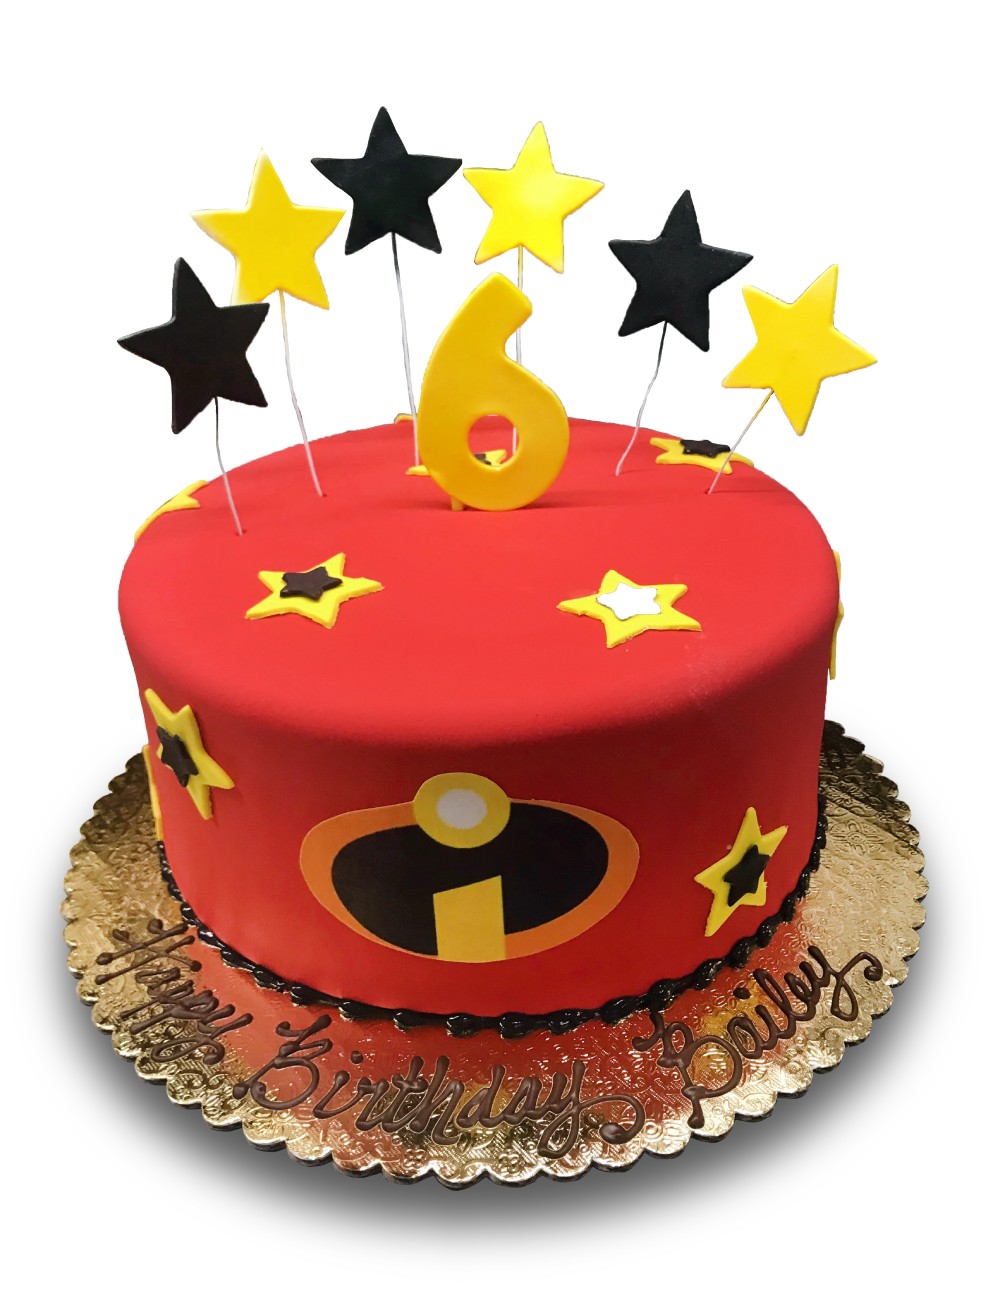 Fondant covered Incredibles cake with scanned logo and gumpaste stars